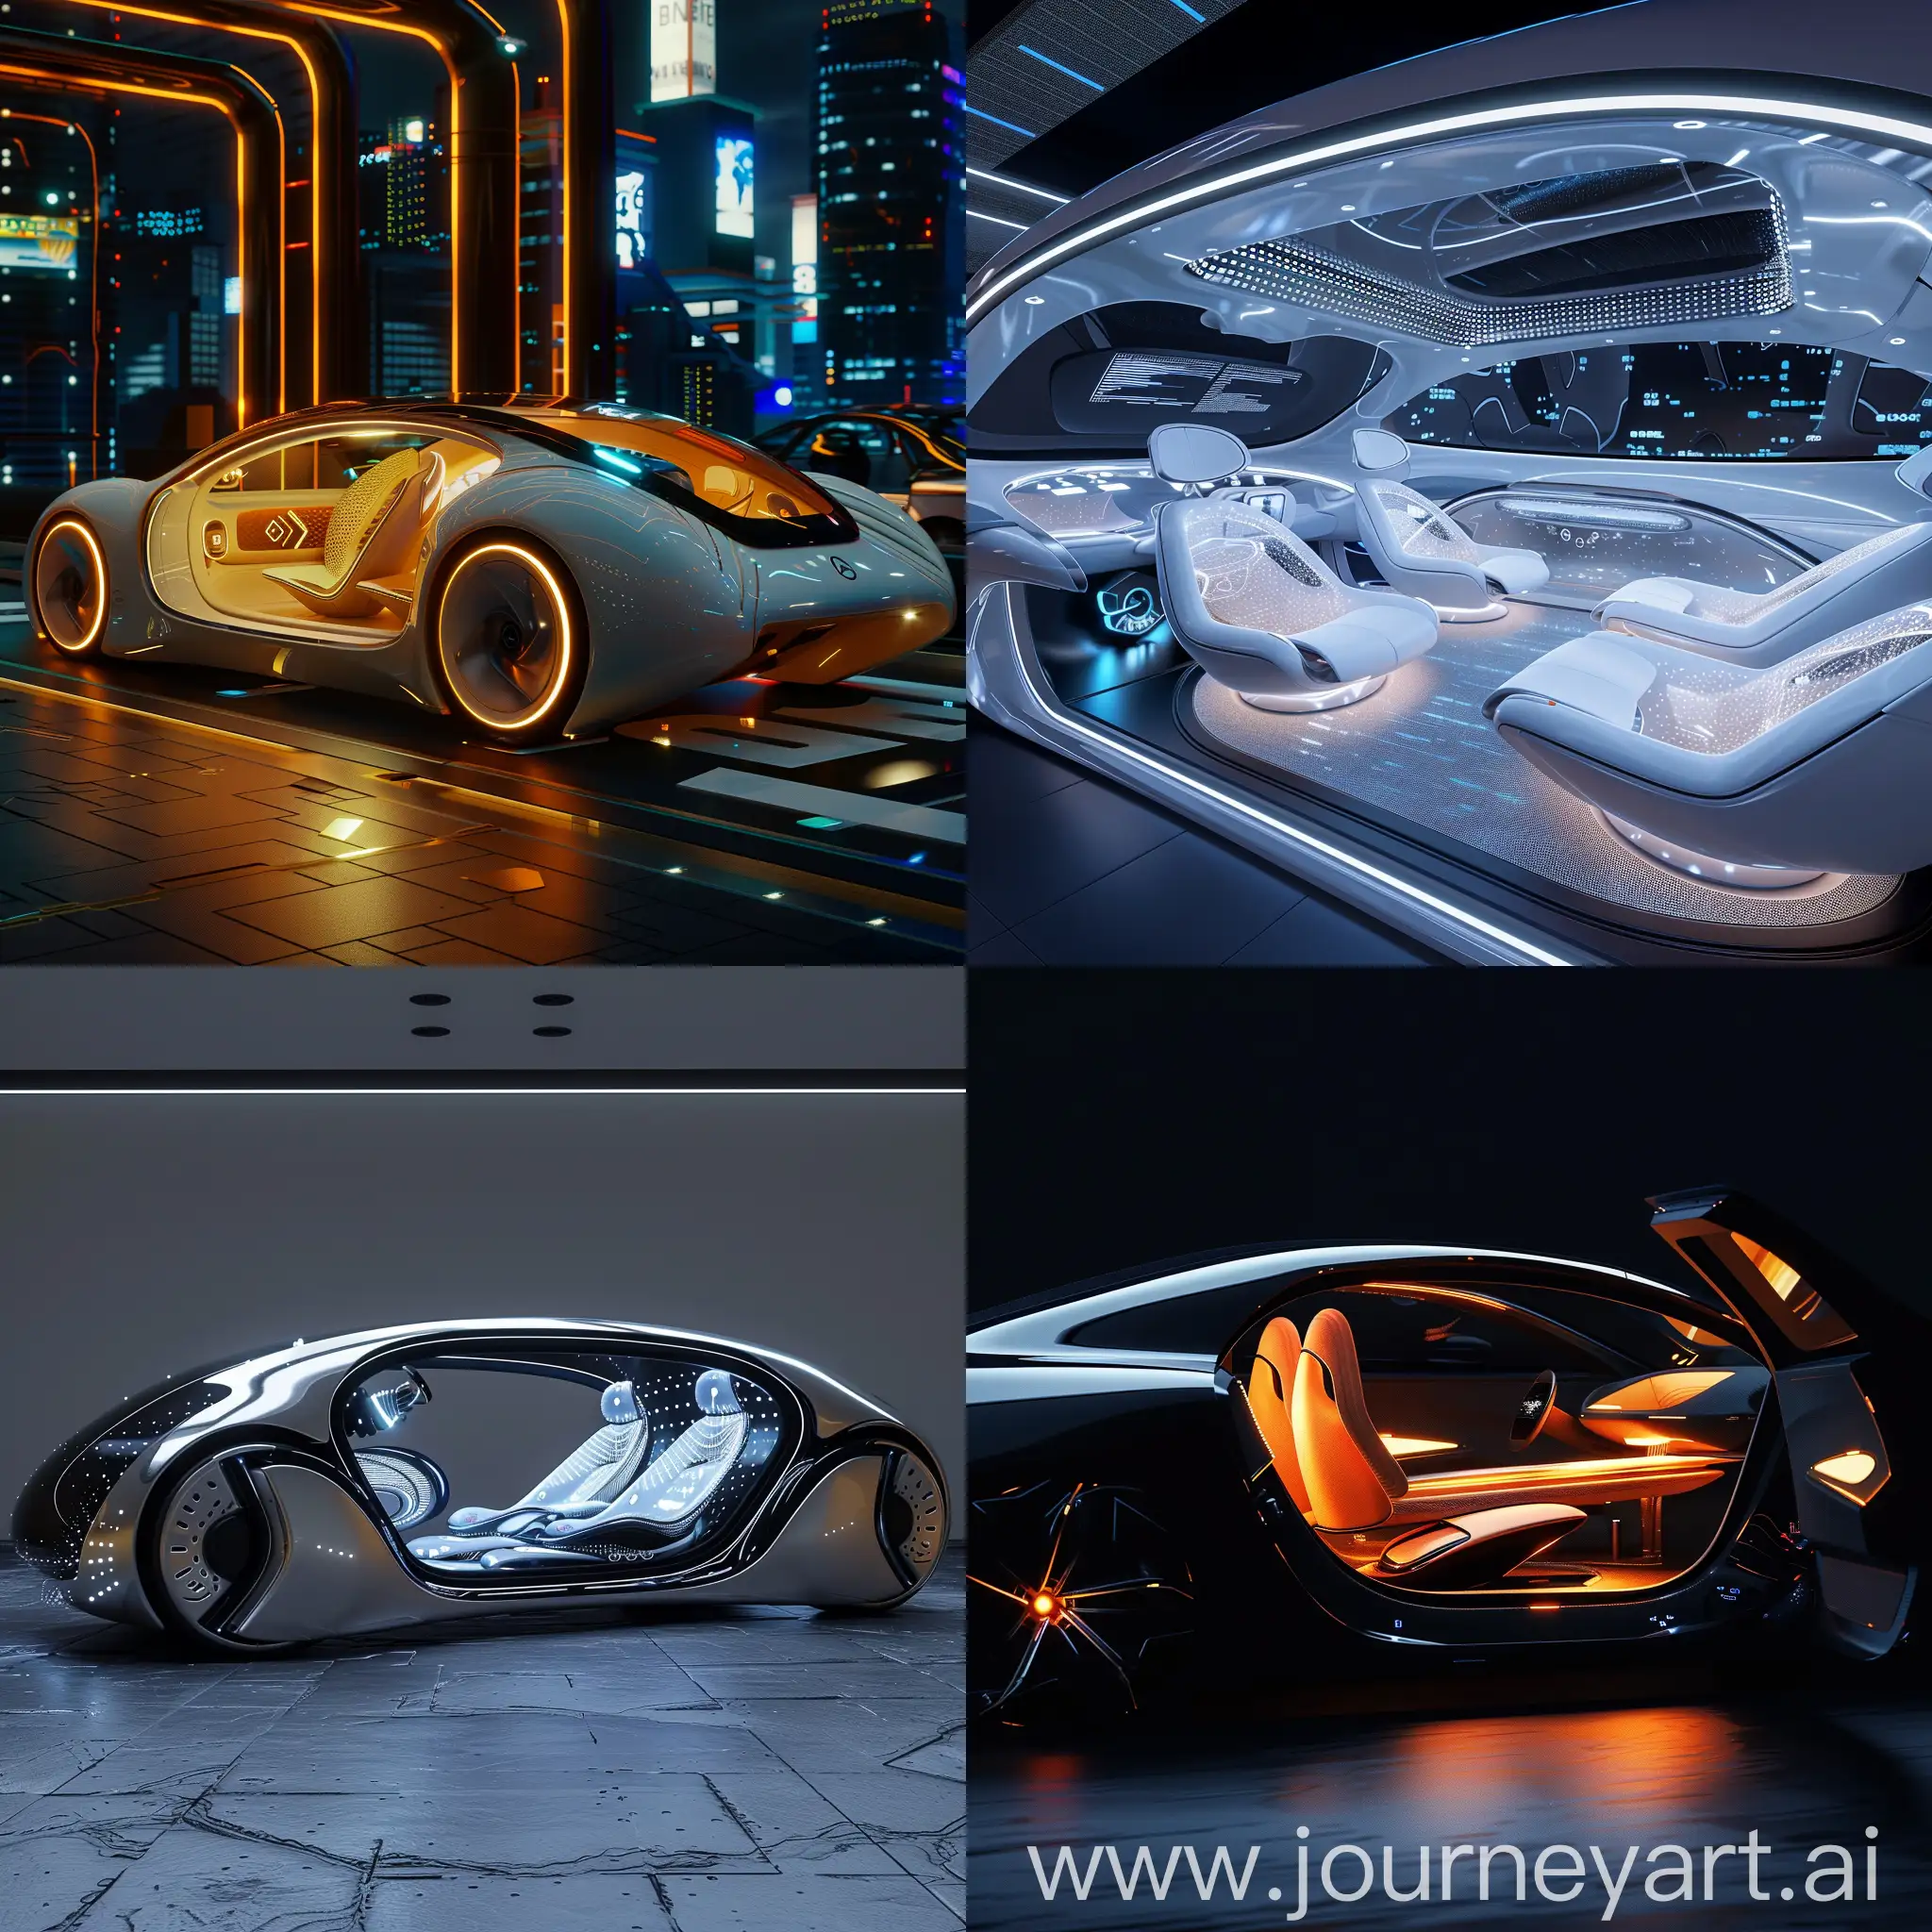 Futuristic-Car-with-Organic-Flowing-Interiors-and-AIPowered-Features